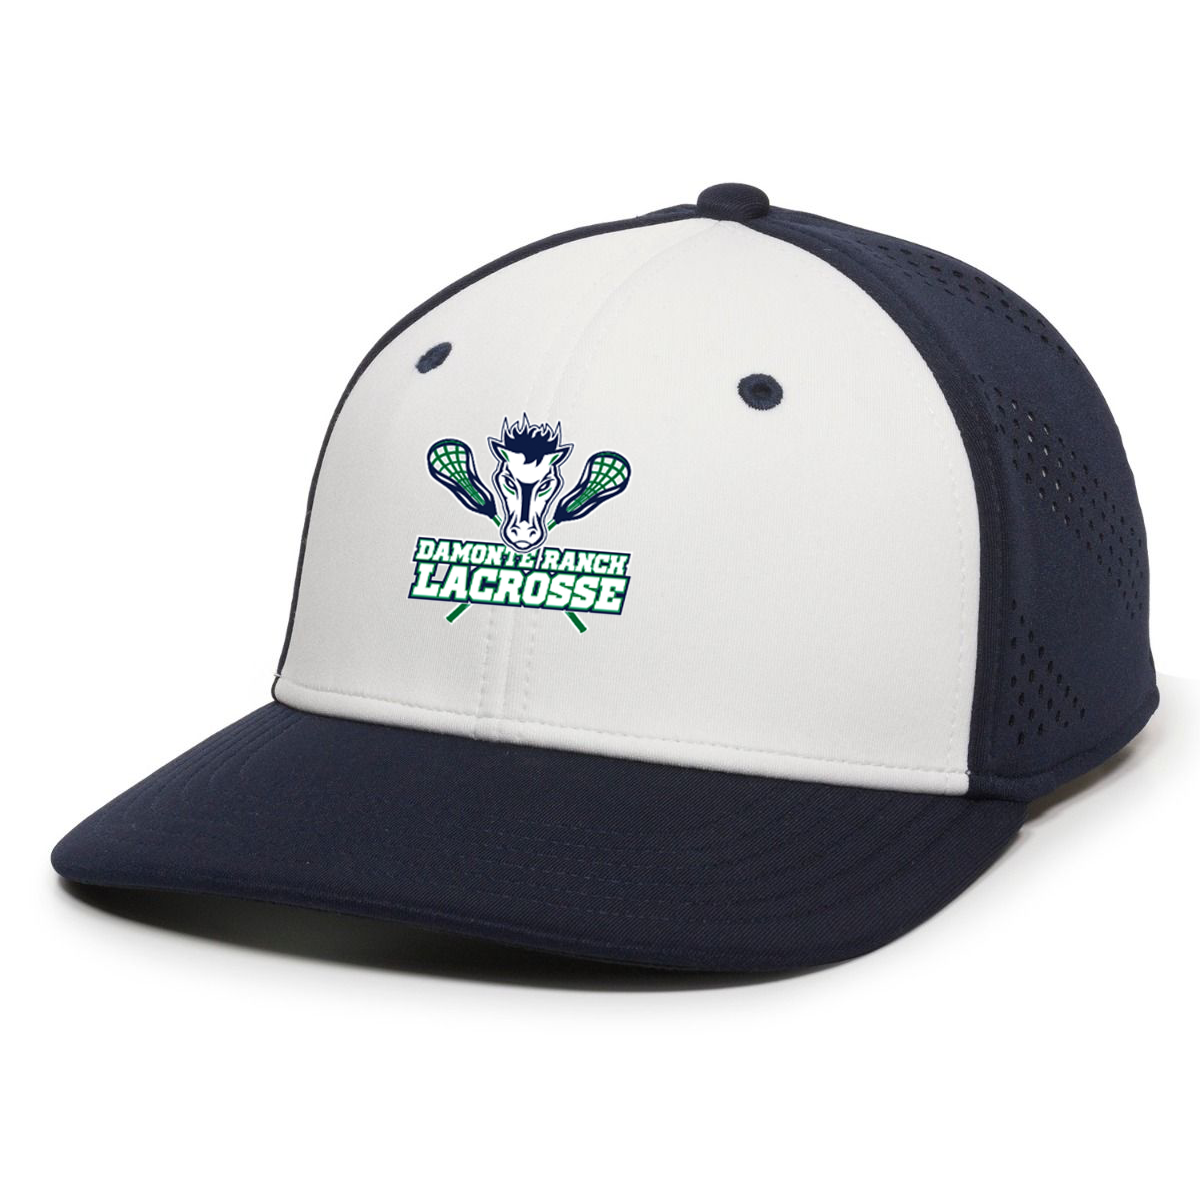 Damonte Ranch Lacrosse ProFlex Fitted Performance Cap